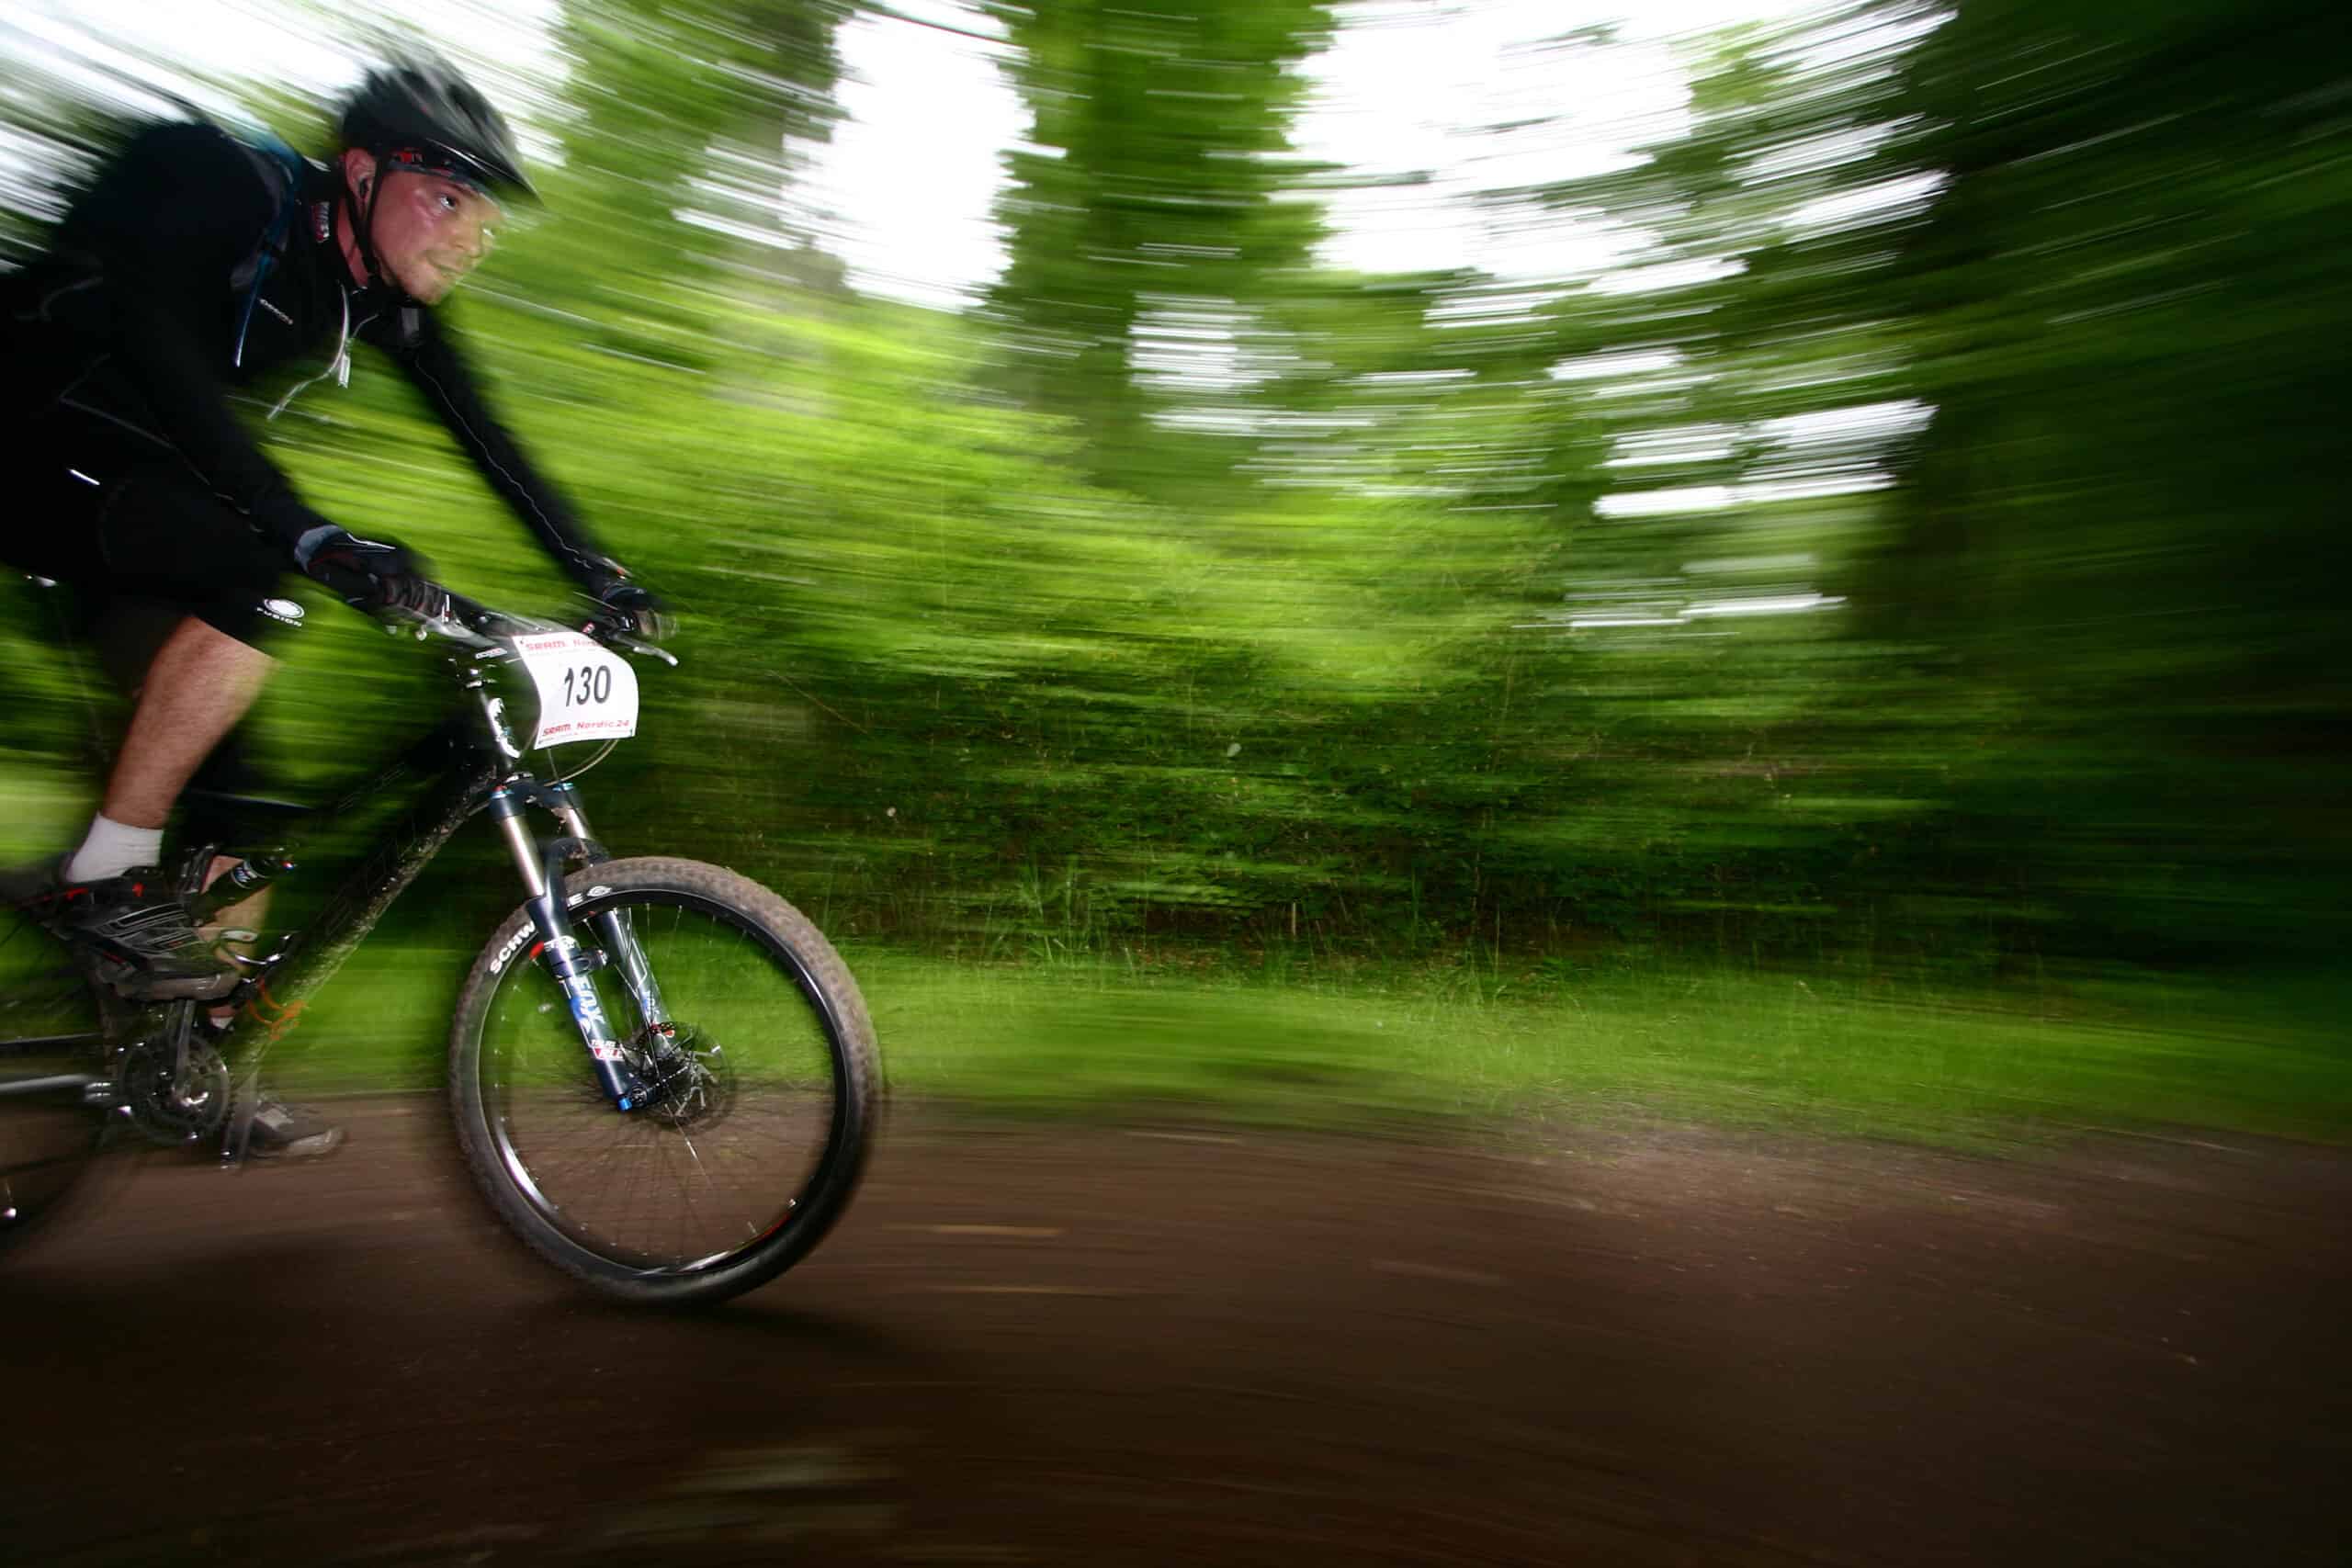 mountain bike race in a forest in denmark,  Shot with low shutter speed to achieve motion blur